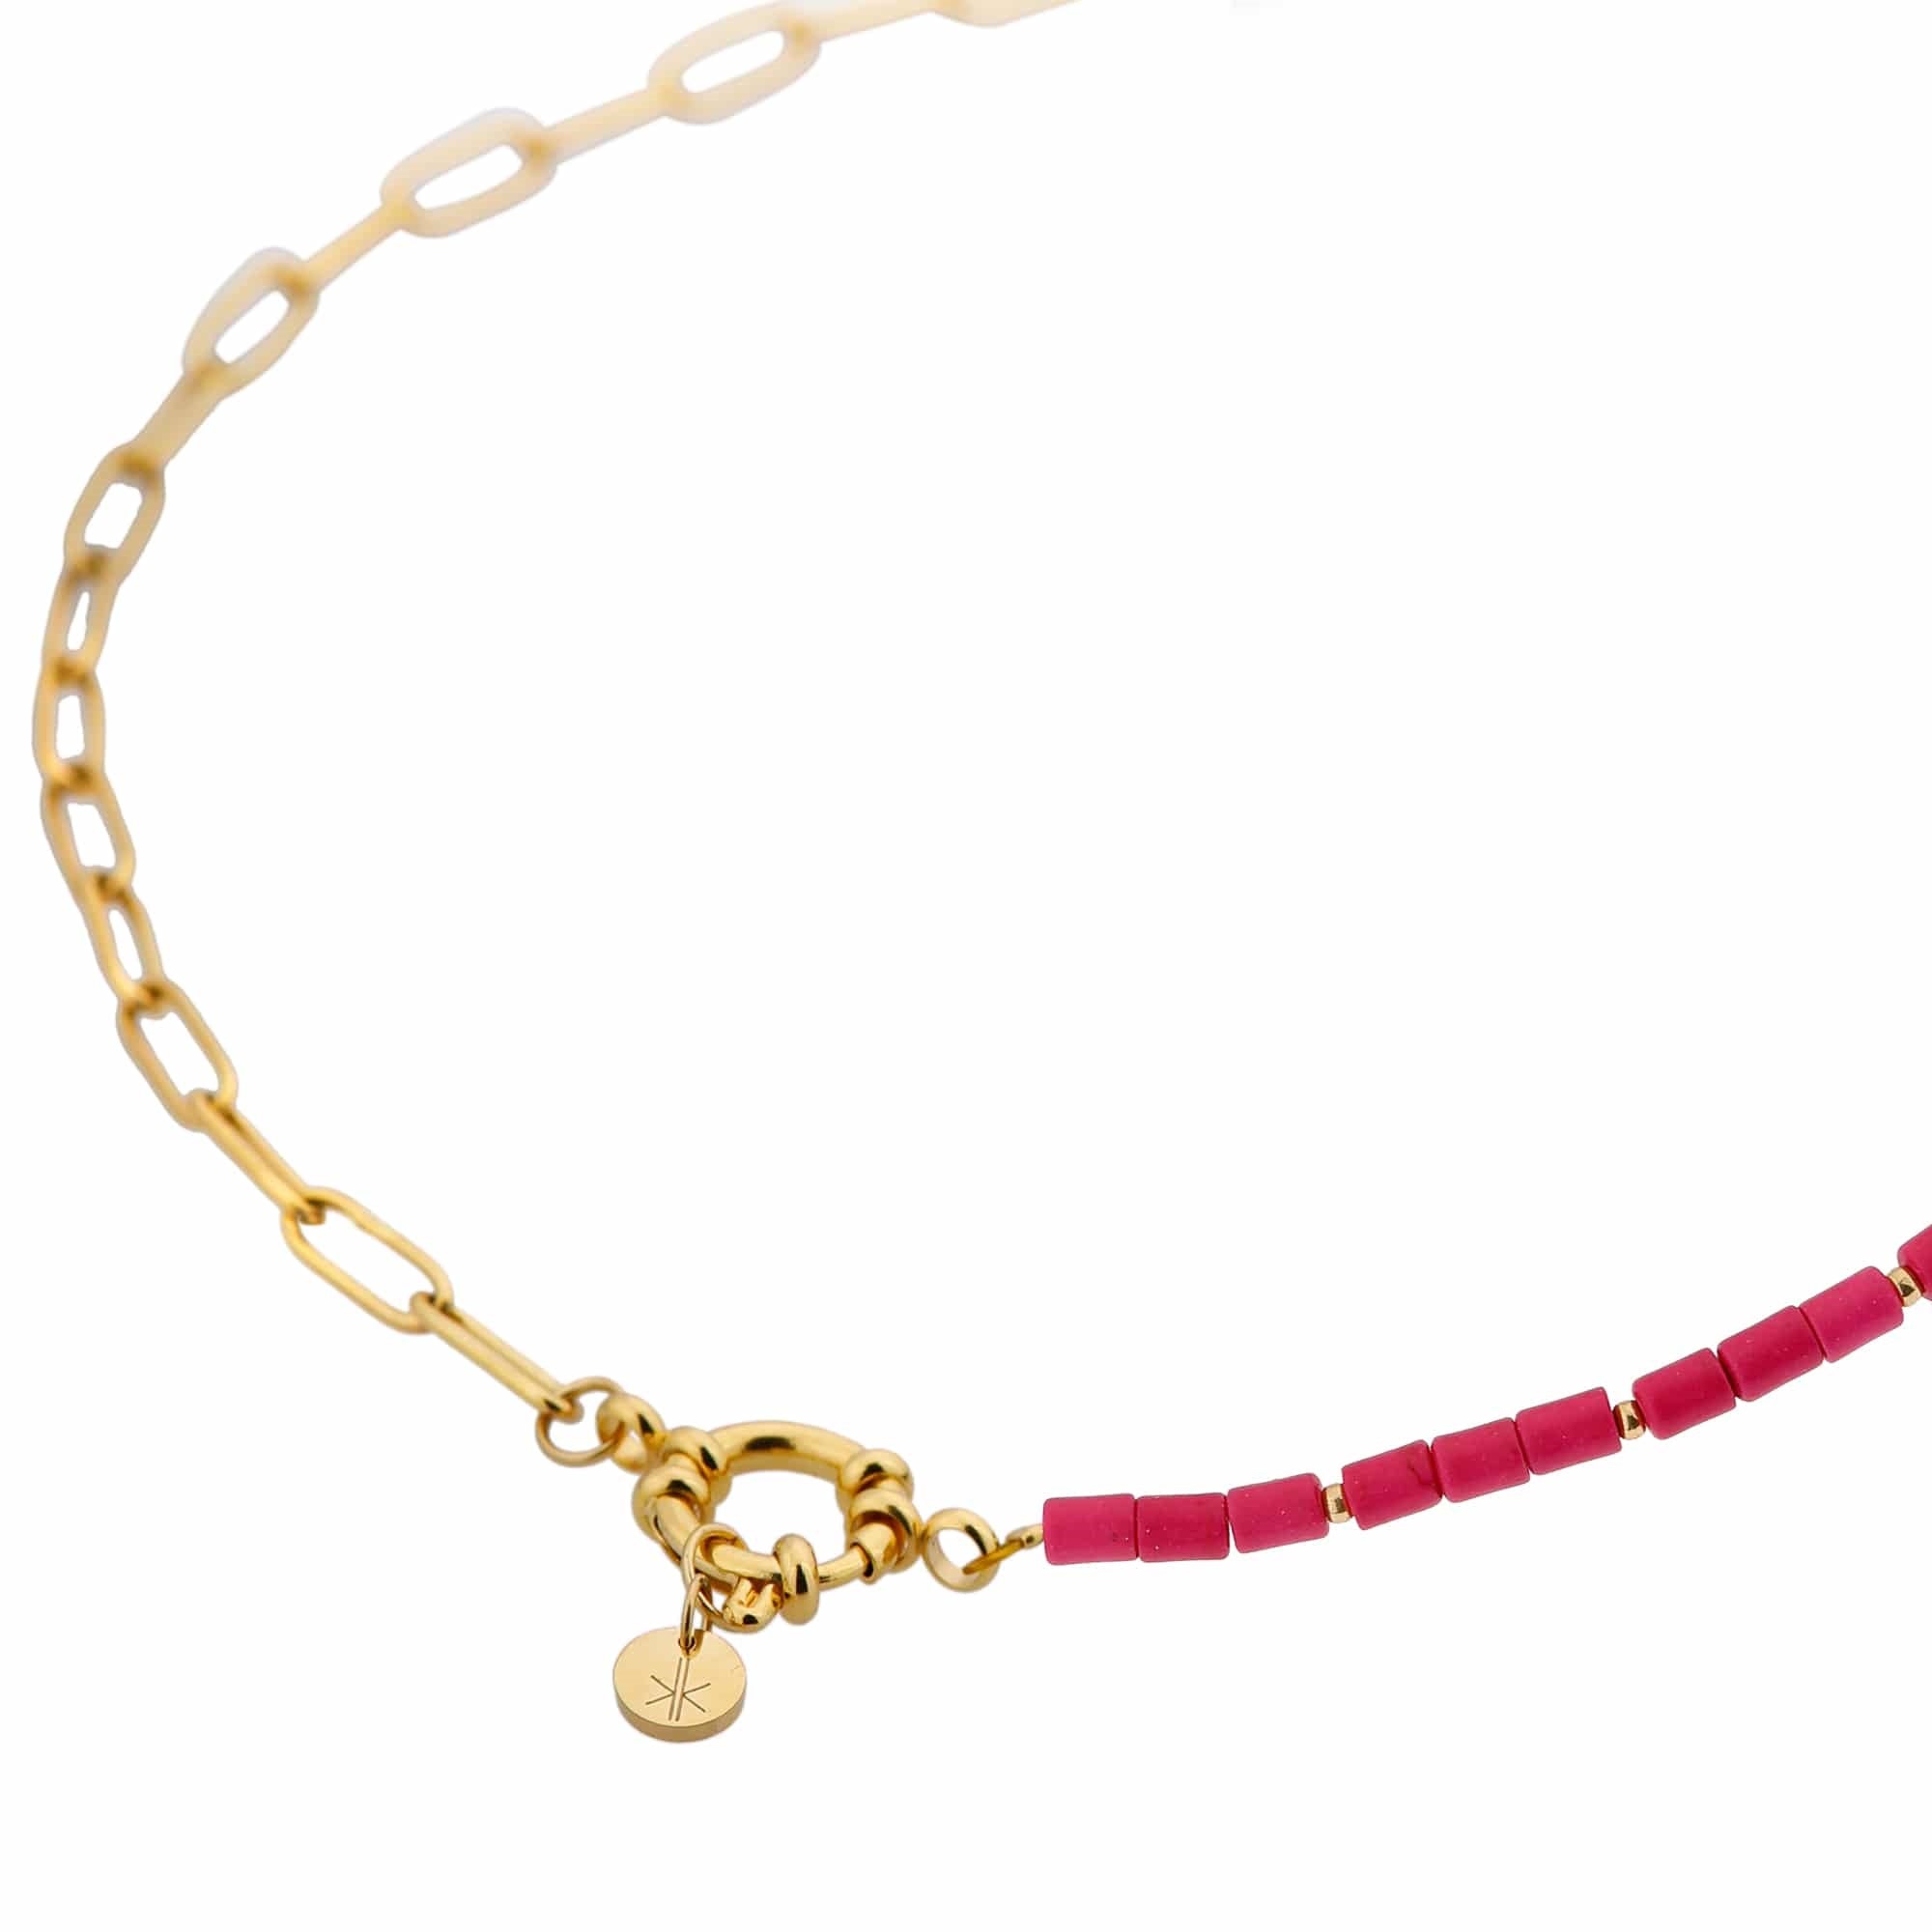 Hold On Raspberry Necklace Gold